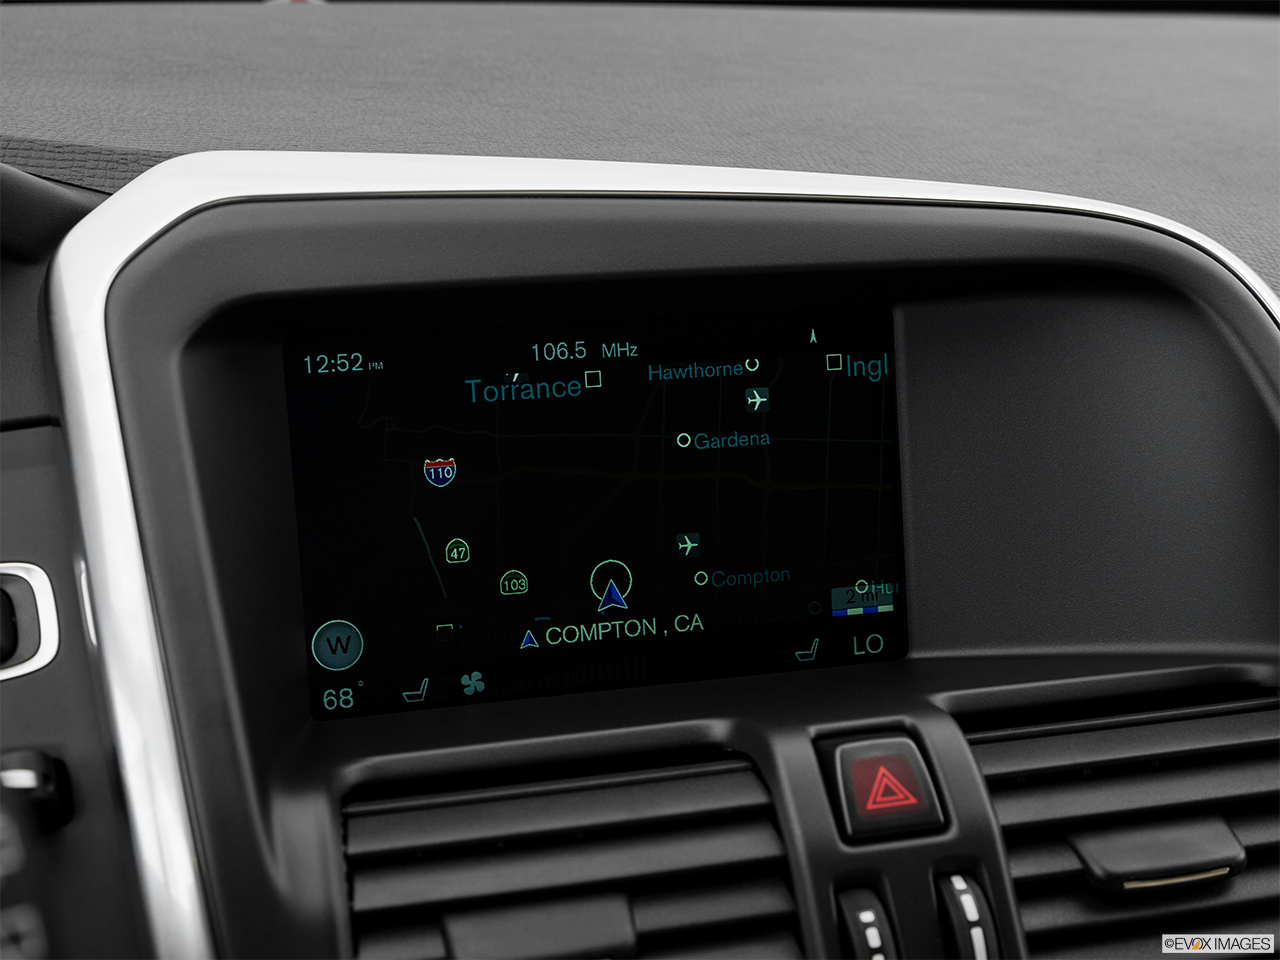 2016 Volvo XC60 T5 Drive-E FWD Premier Driver position view of navigation system. 